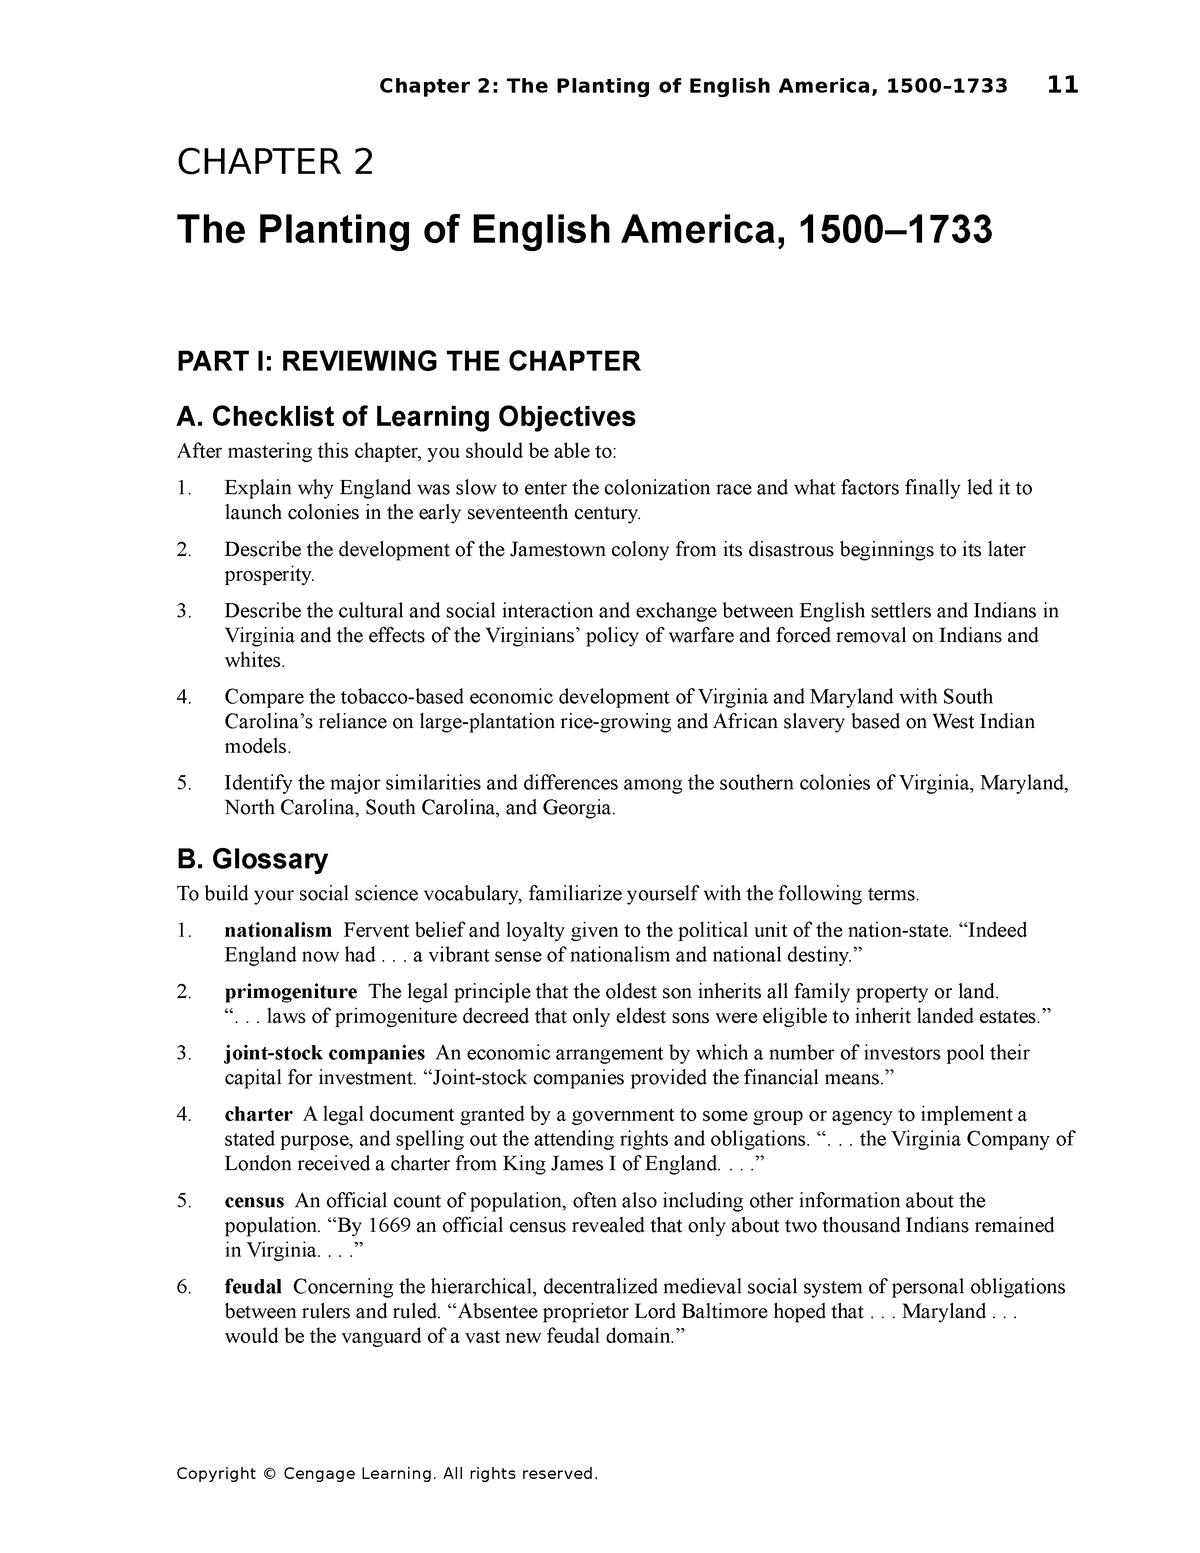 Apush Chapter 2 Guided Reading CHAPTER 2 The Planting Of English America 1500 PART I